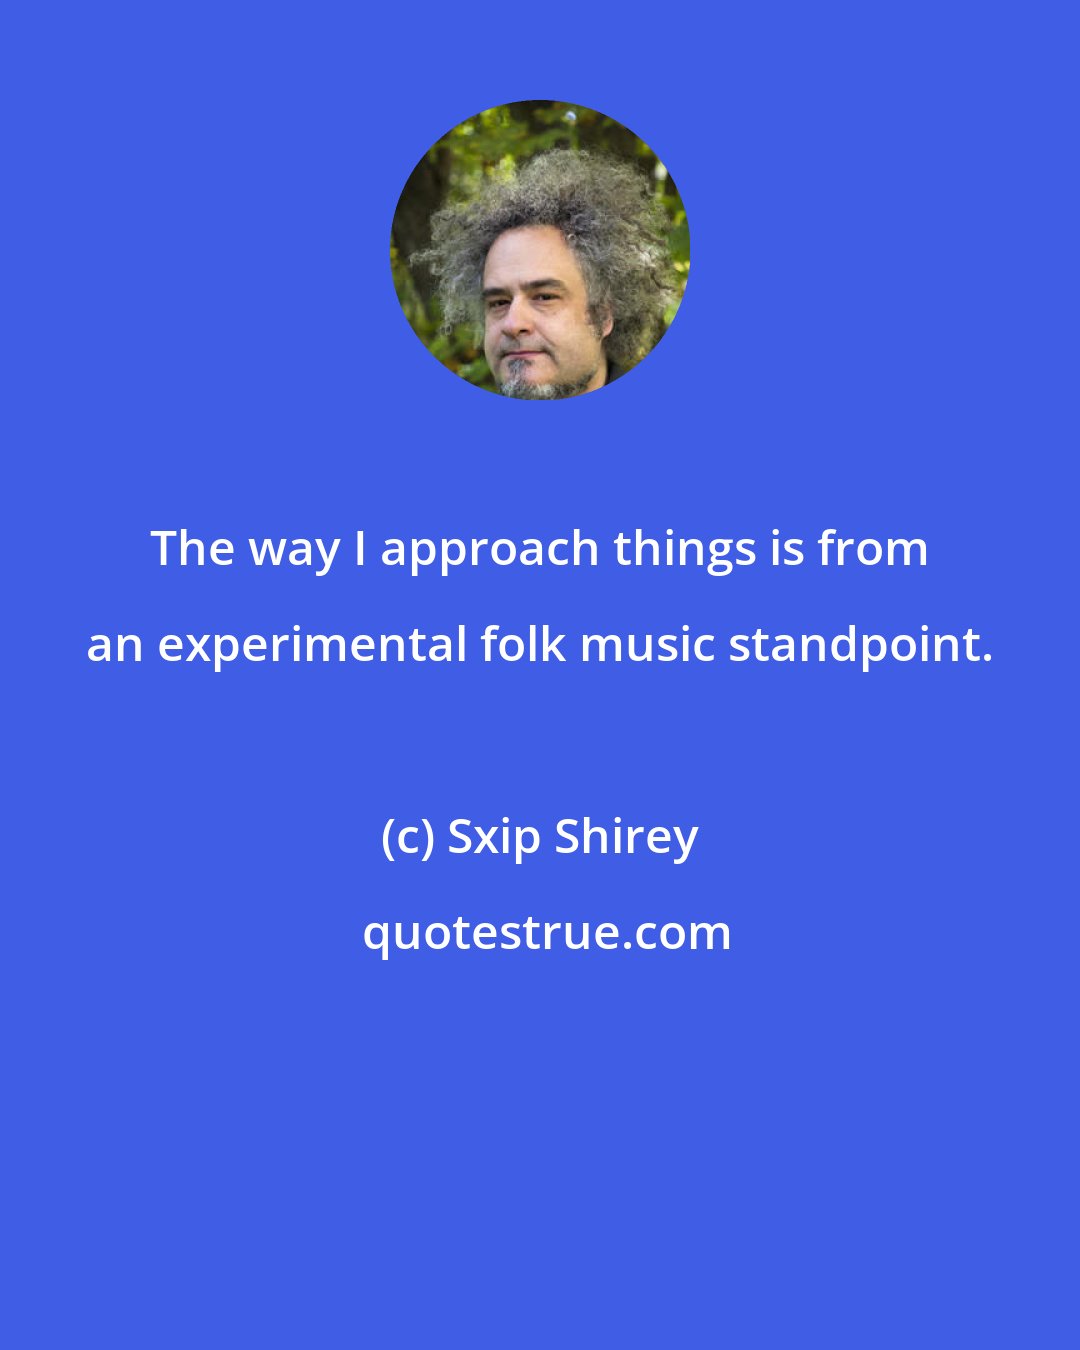 Sxip Shirey: The way I approach things is from an experimental folk music standpoint.